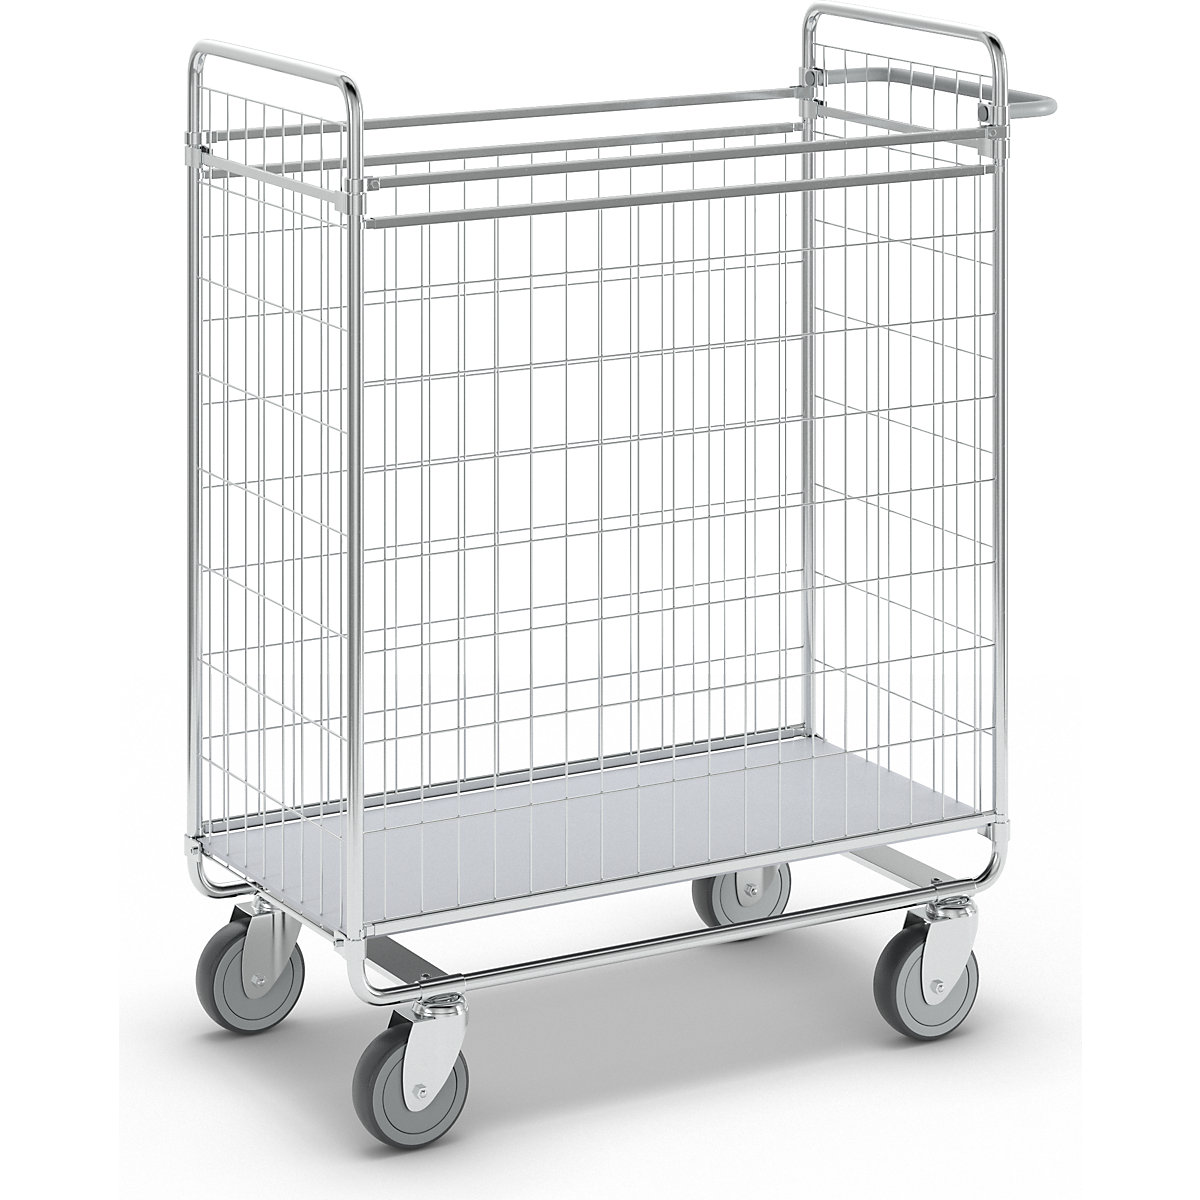 SERIES 100 four-sided trolley – HelgeNyberg, max. load 100 kg, LxWxH 930 x 460 x 1120 mm-2